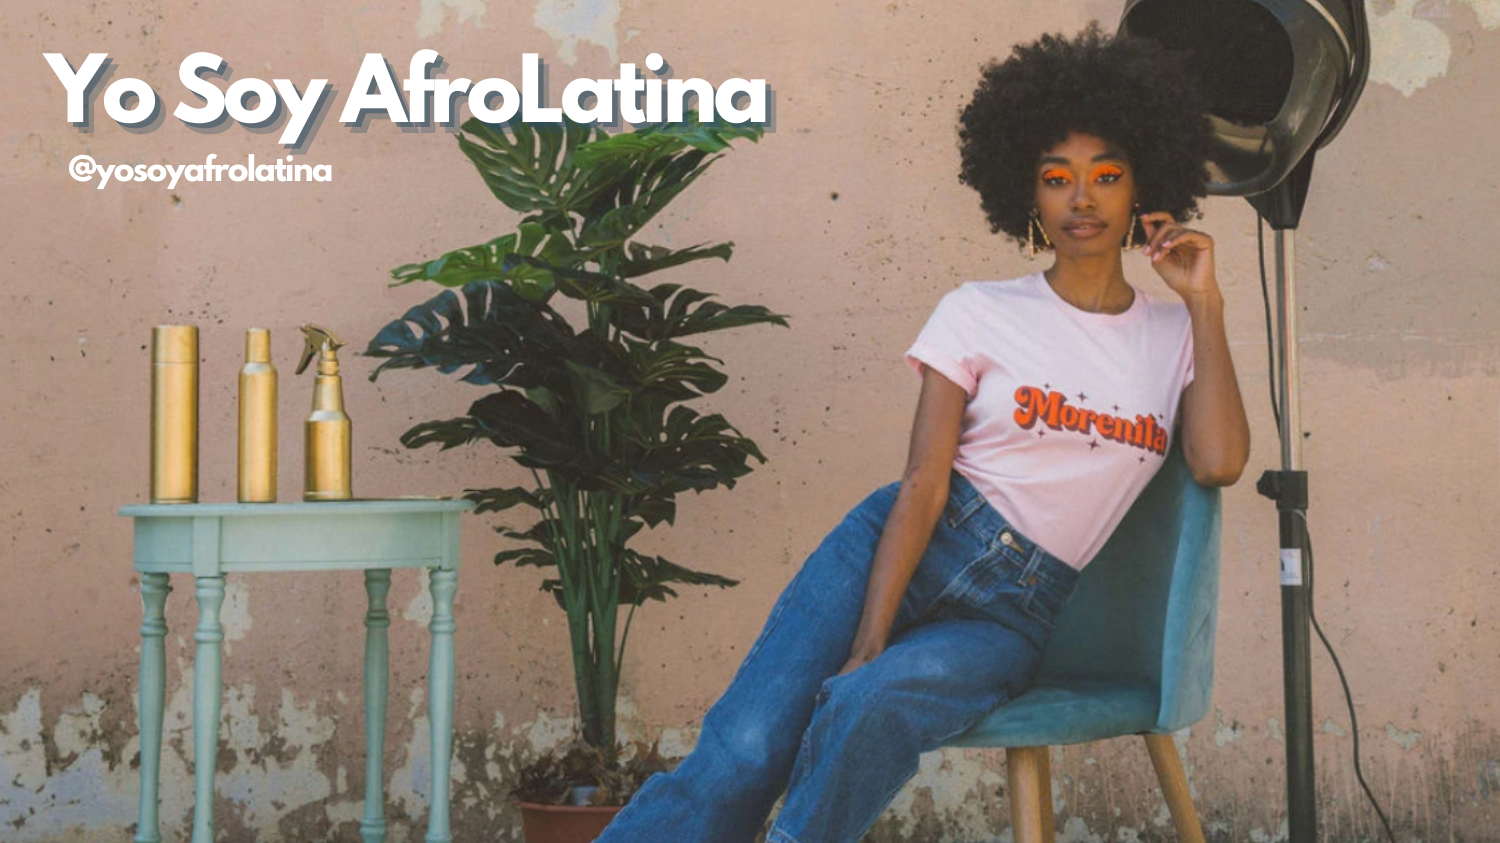 Image of Yo Soy AfroLatino, one of 10 Latinx-owned brands highlighted